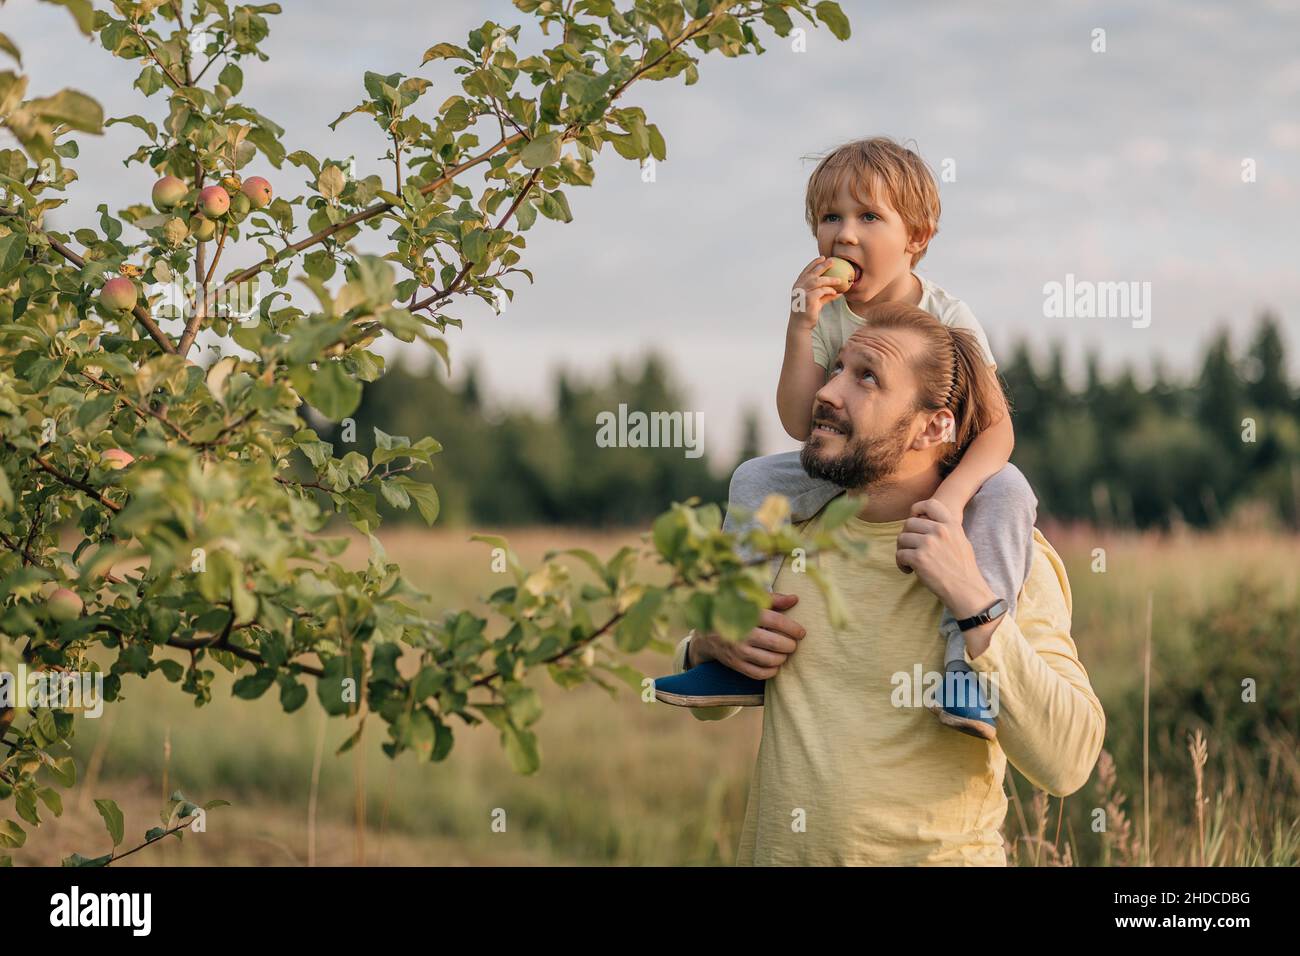 Father and son in field in village mischief bite apple from tree. Stock Photo